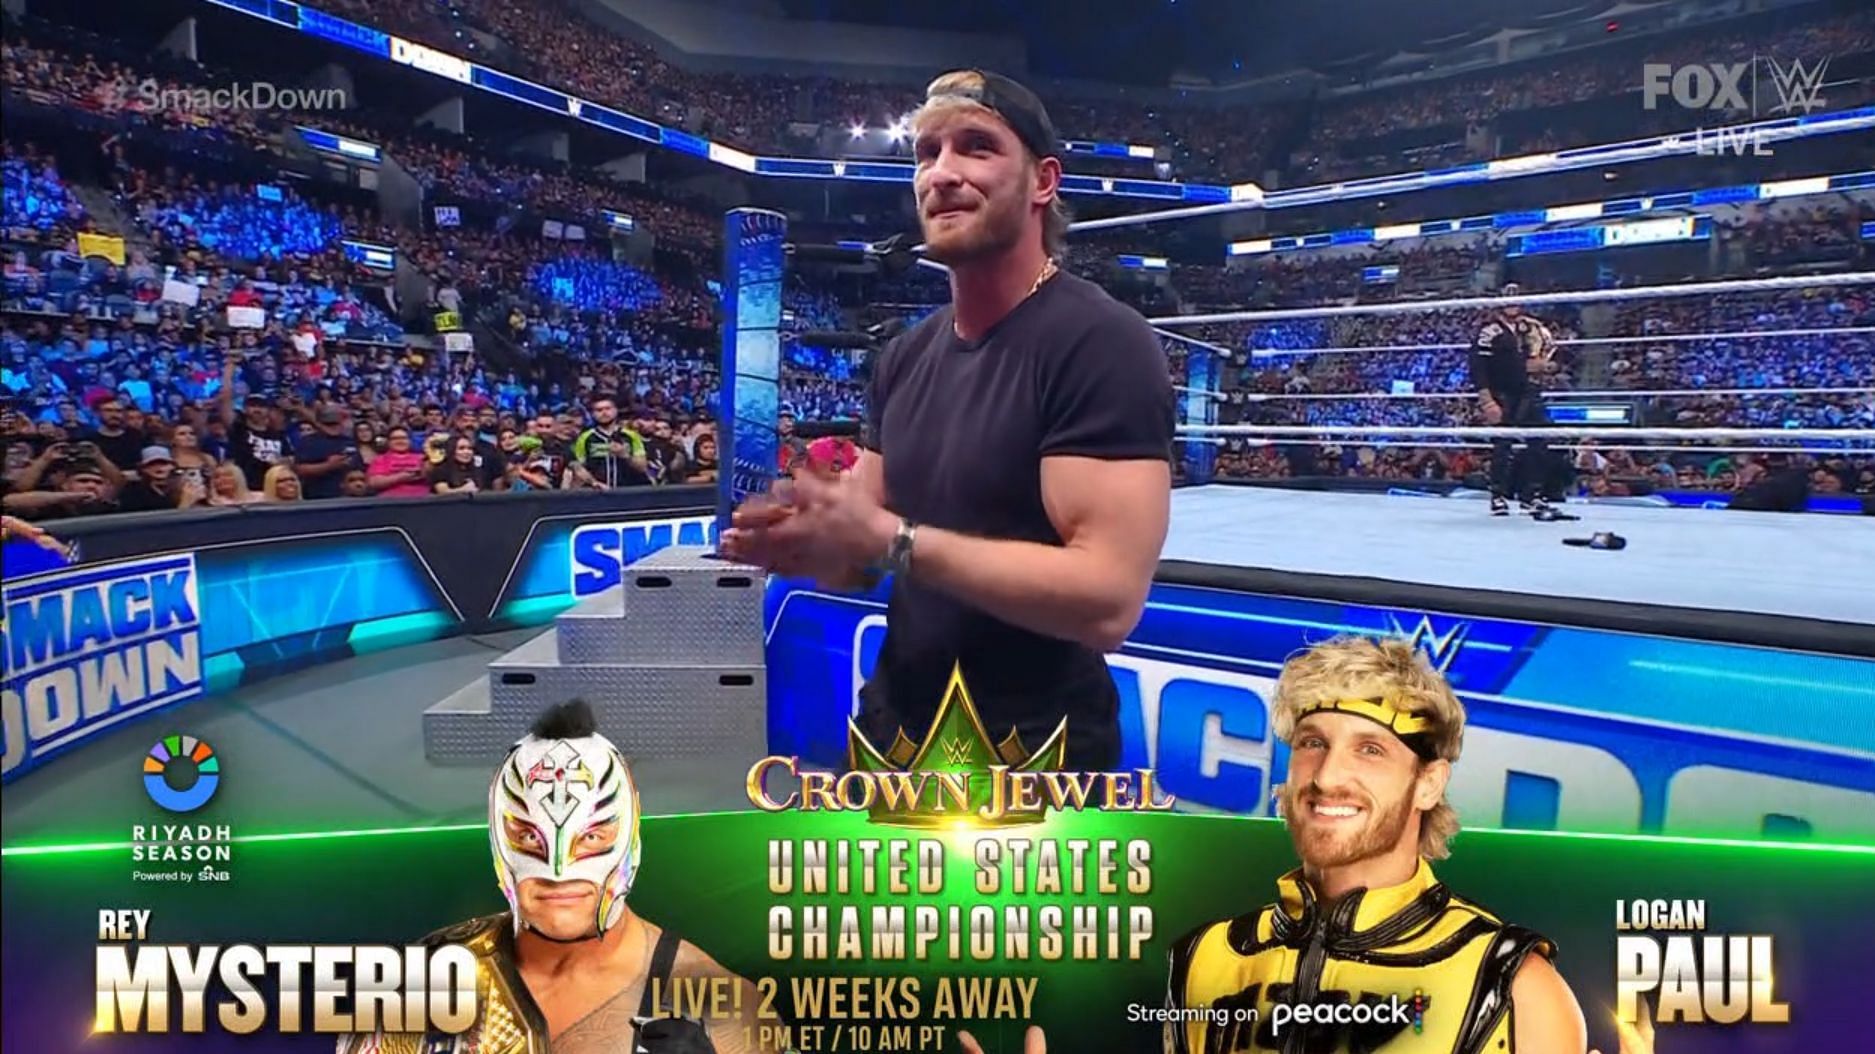 Could Logan Paul win the US Championship at WWE Crown Jewel?